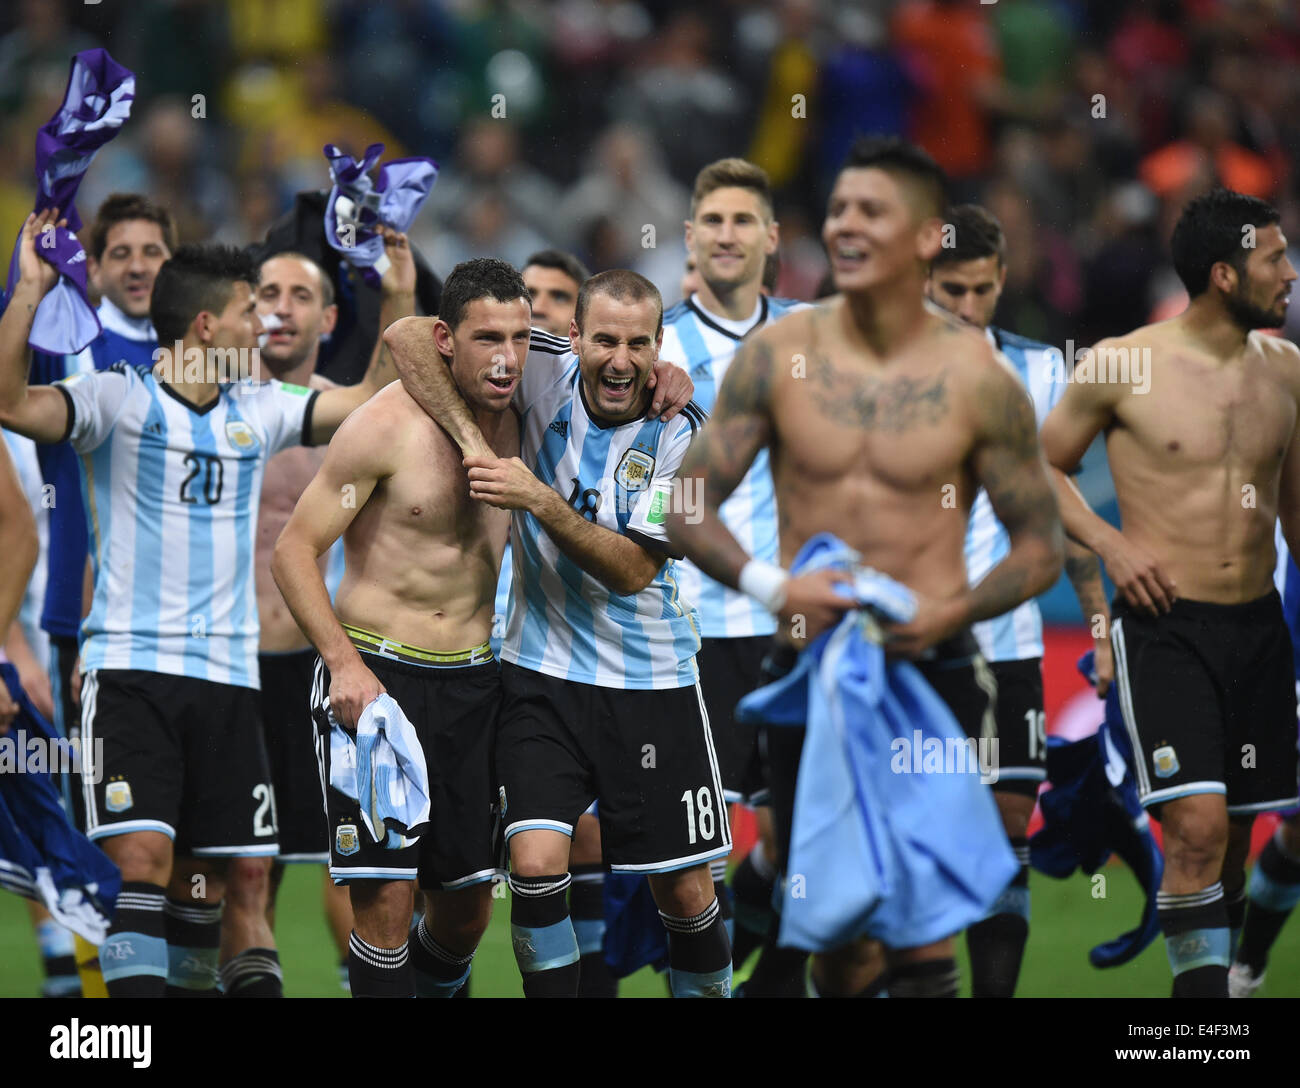 Sao Paulo, Brazil. 09th July, 2014. Argentina's Maxi Rodriguez (2-L) celebrates with his team mates after winning the penalty shoot-out of the FIFA World Cup 2014 semi-final soccer match between the Netherlands and Argentina at the Arena Corinthians in Sao Paulo, Brazil, 09 July 2014. Photo: Marius Becker/dpa/Alamy Live News Stock Photo